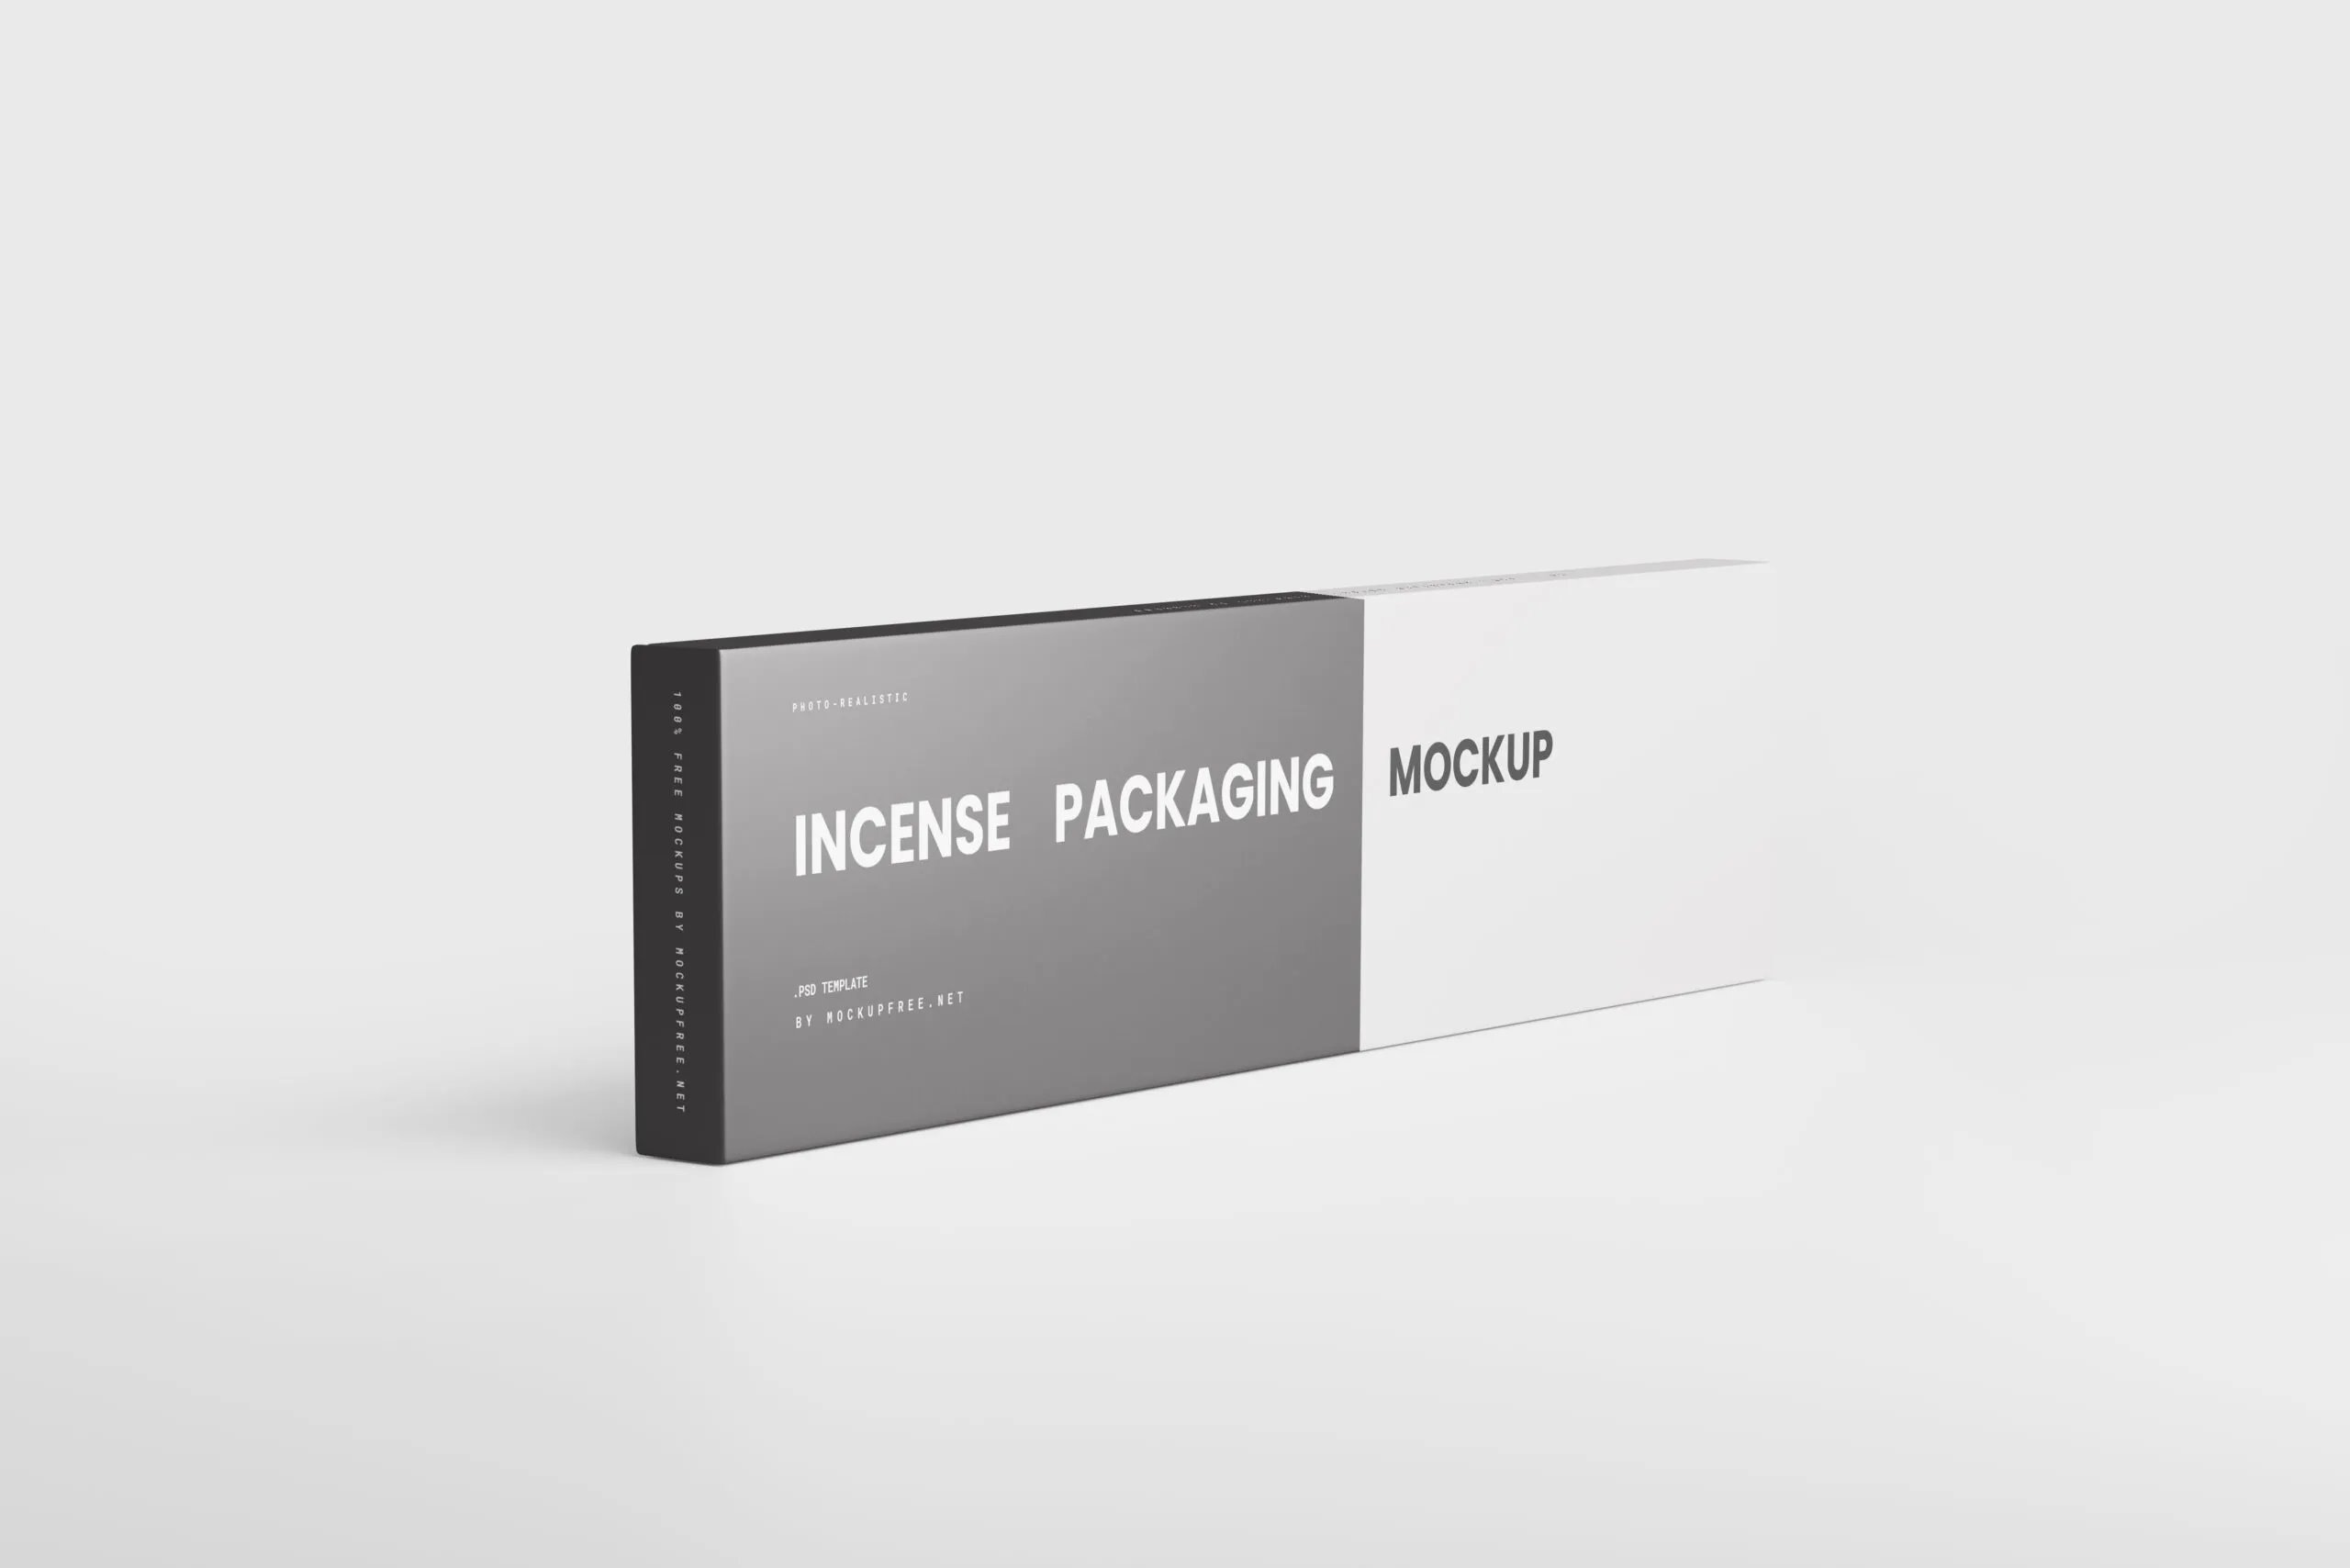 5 Incense Packaging Mockups in Different Sights FREE PSD